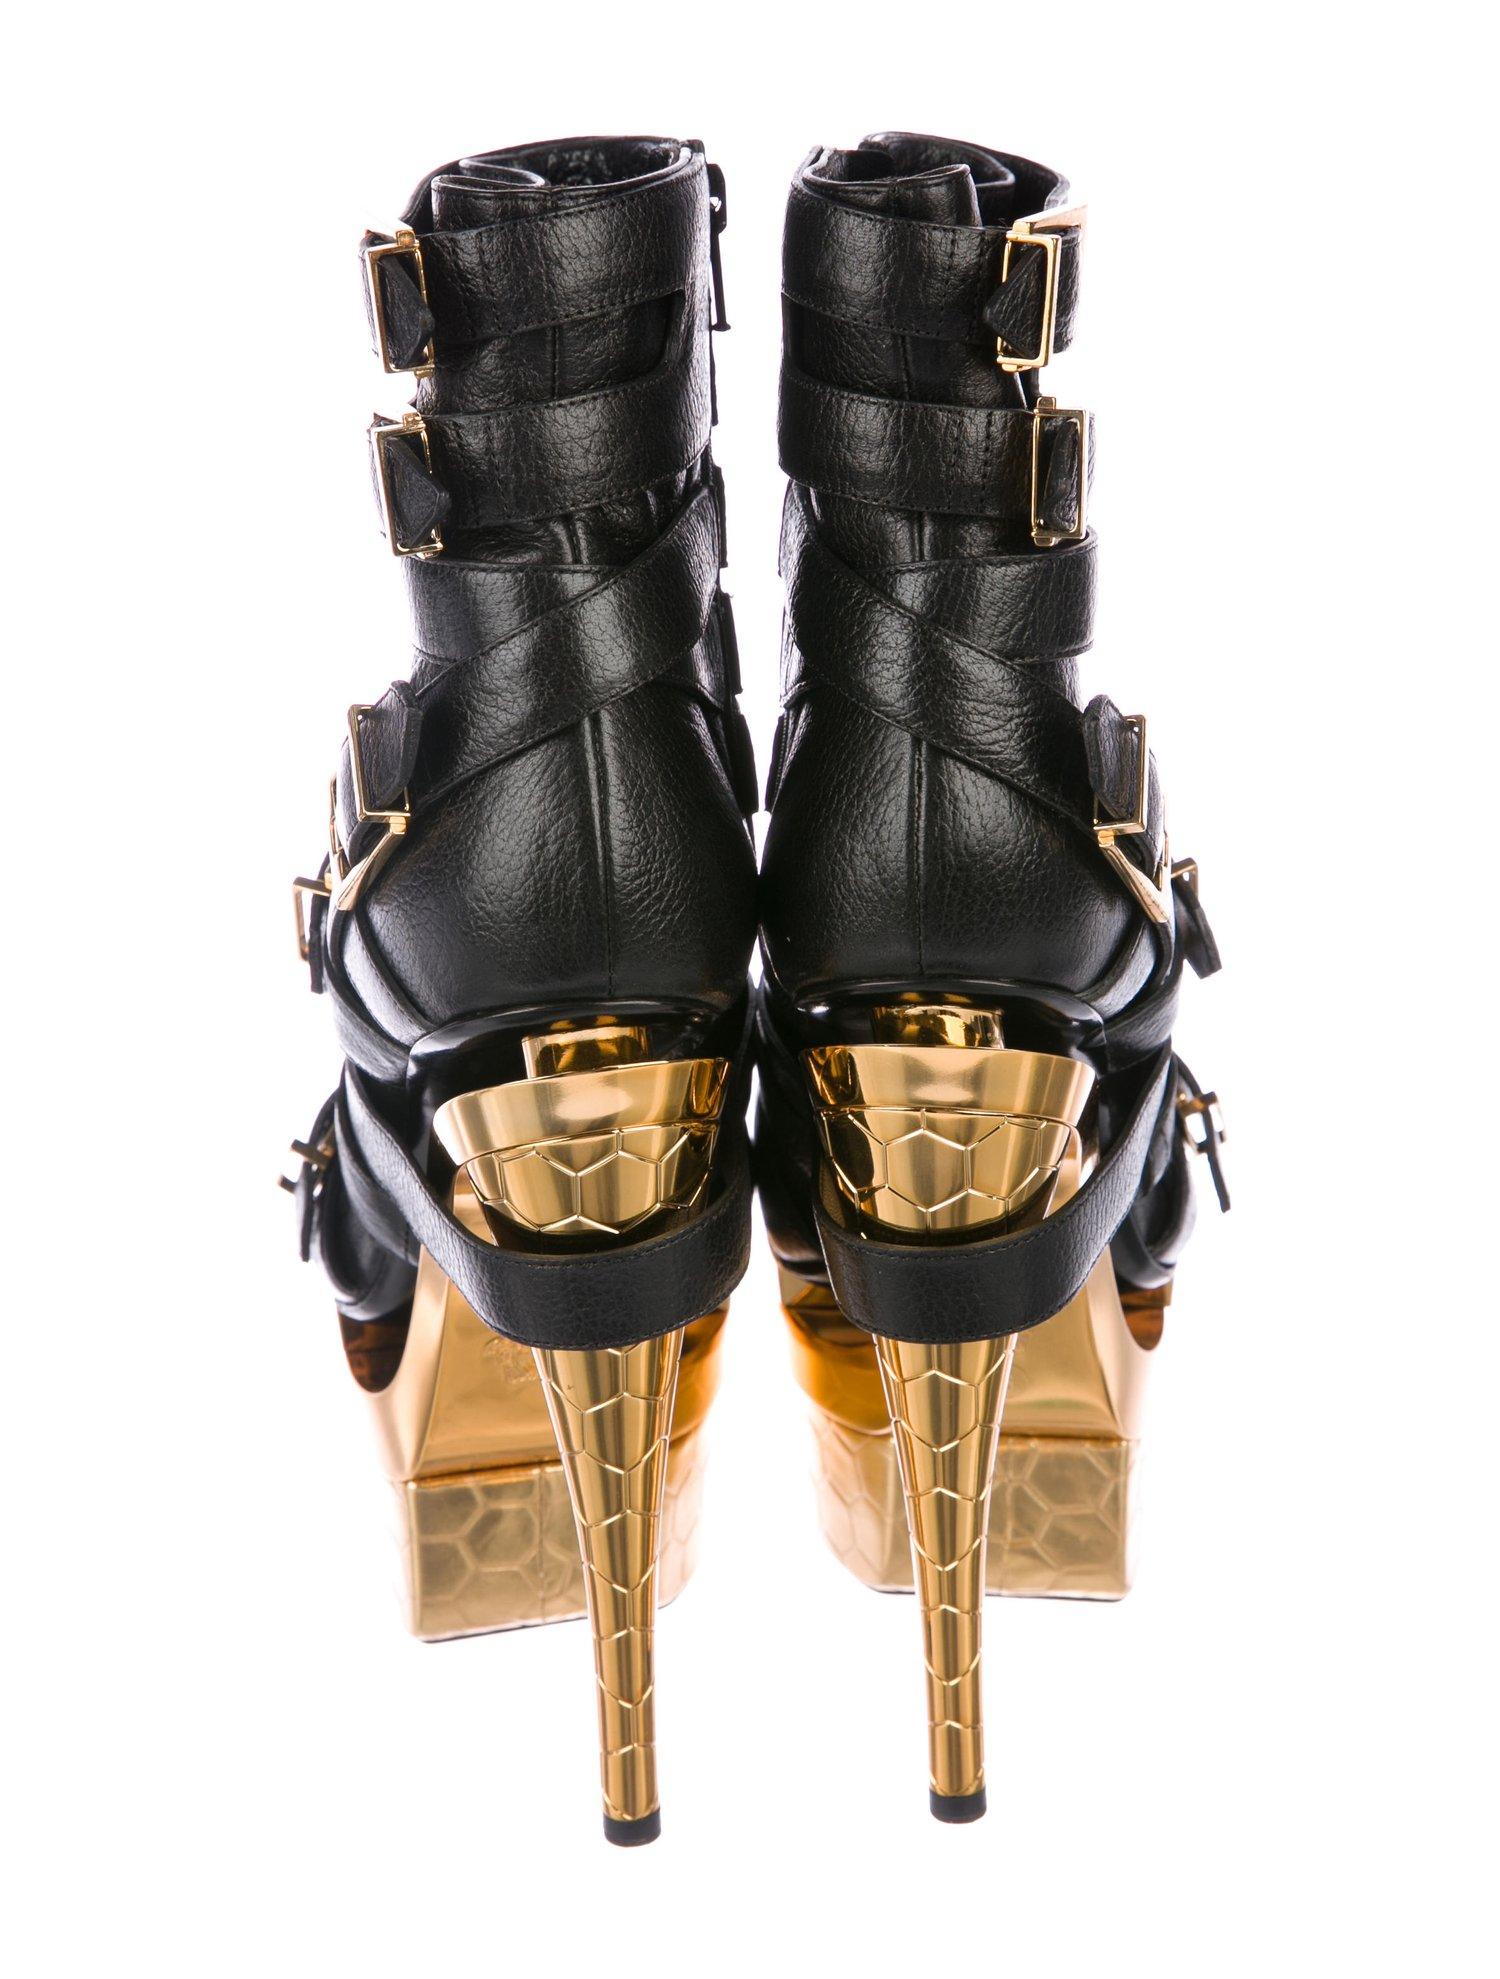 Women's Versace NEW Runway Black Leather Gold Buckle Ankle Boots Booties in Box